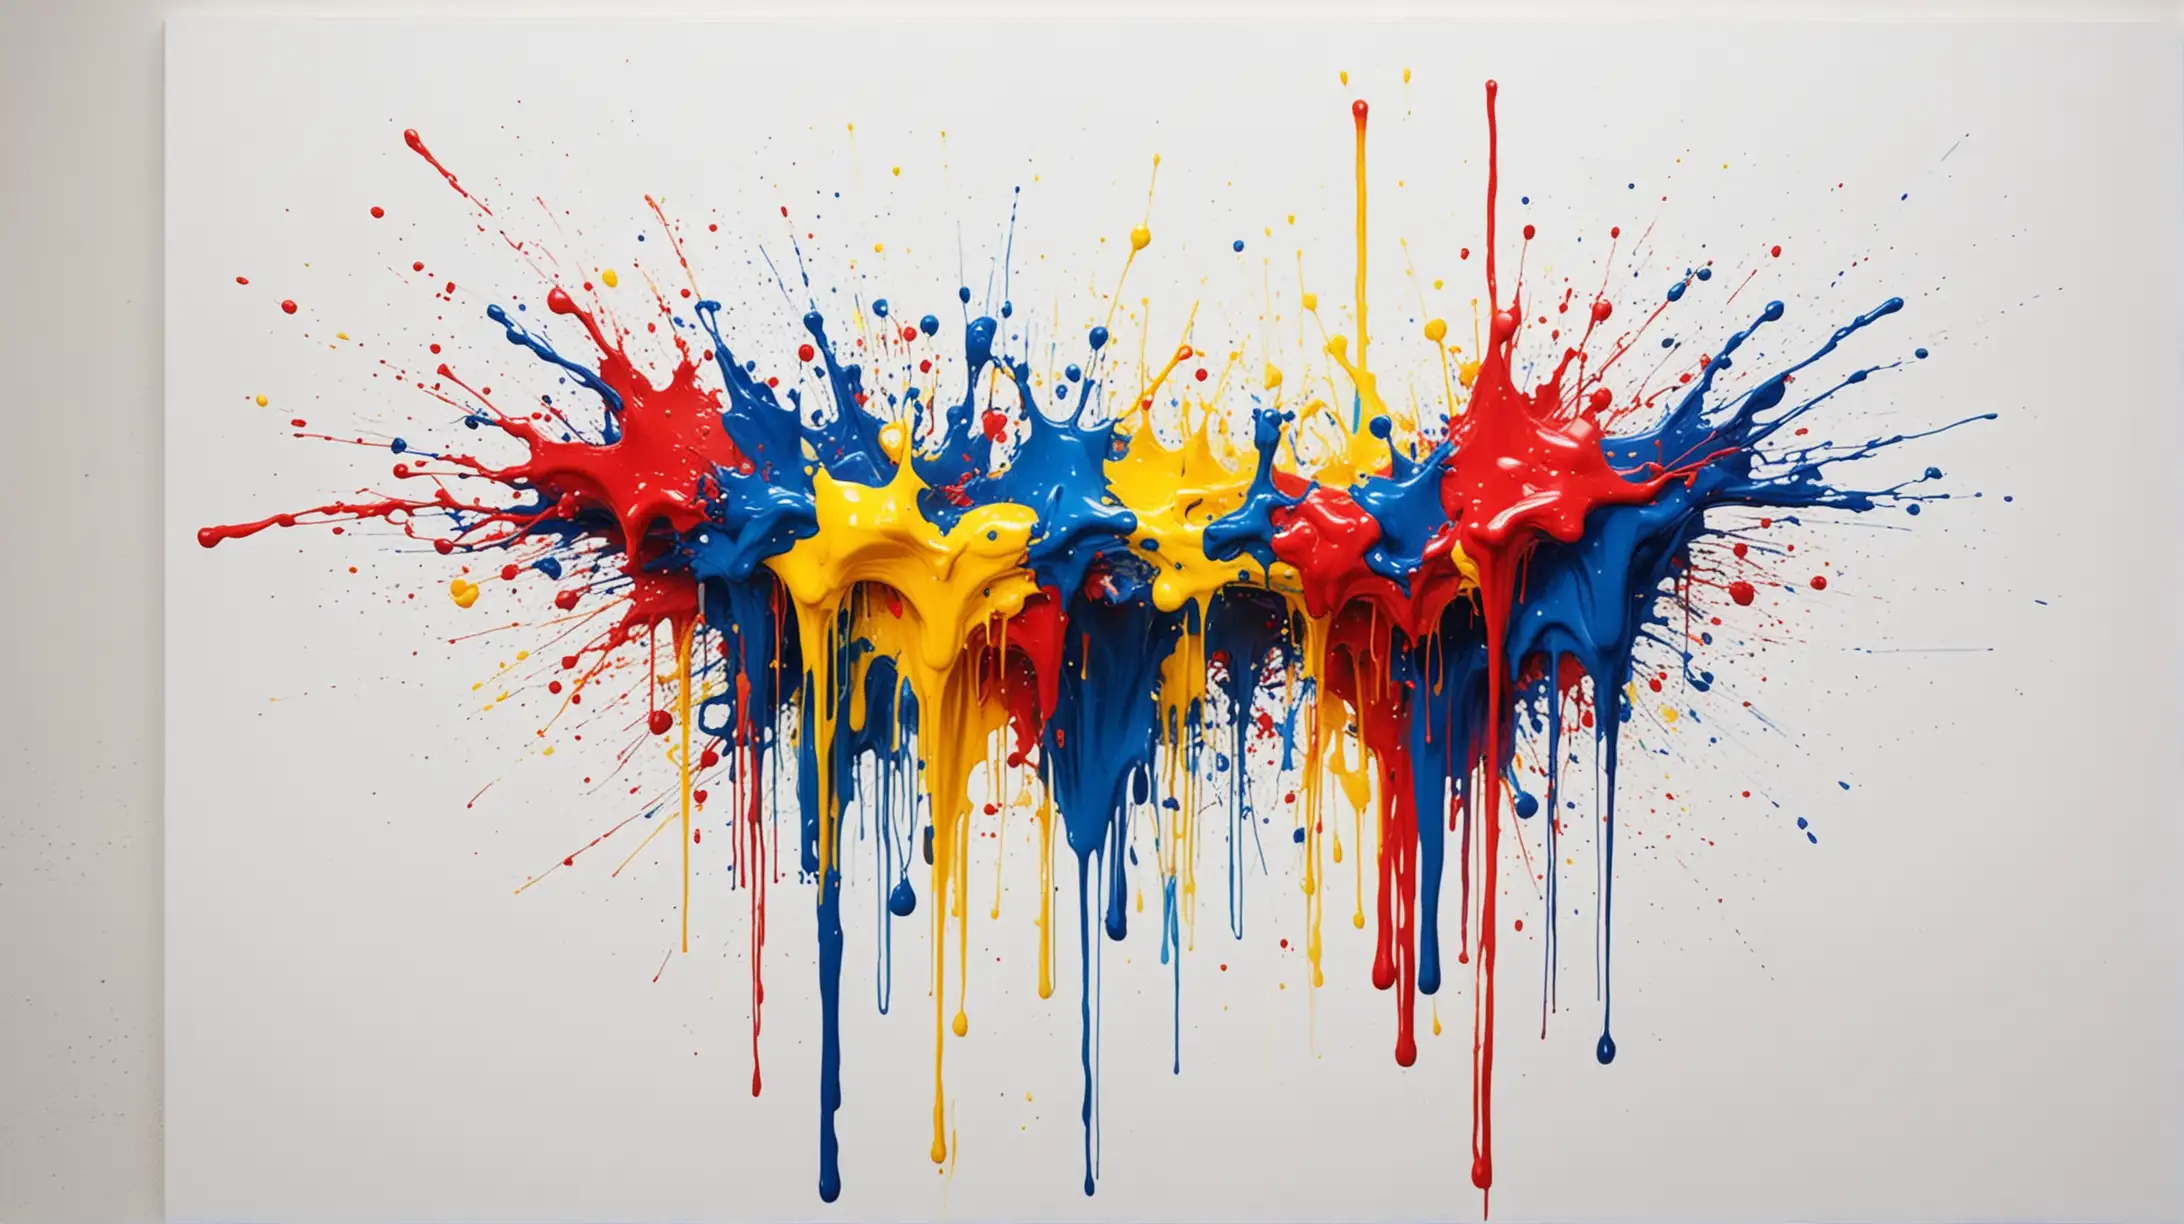 Vibrant Abstract Splash Painting on White Background with Dripping Effect